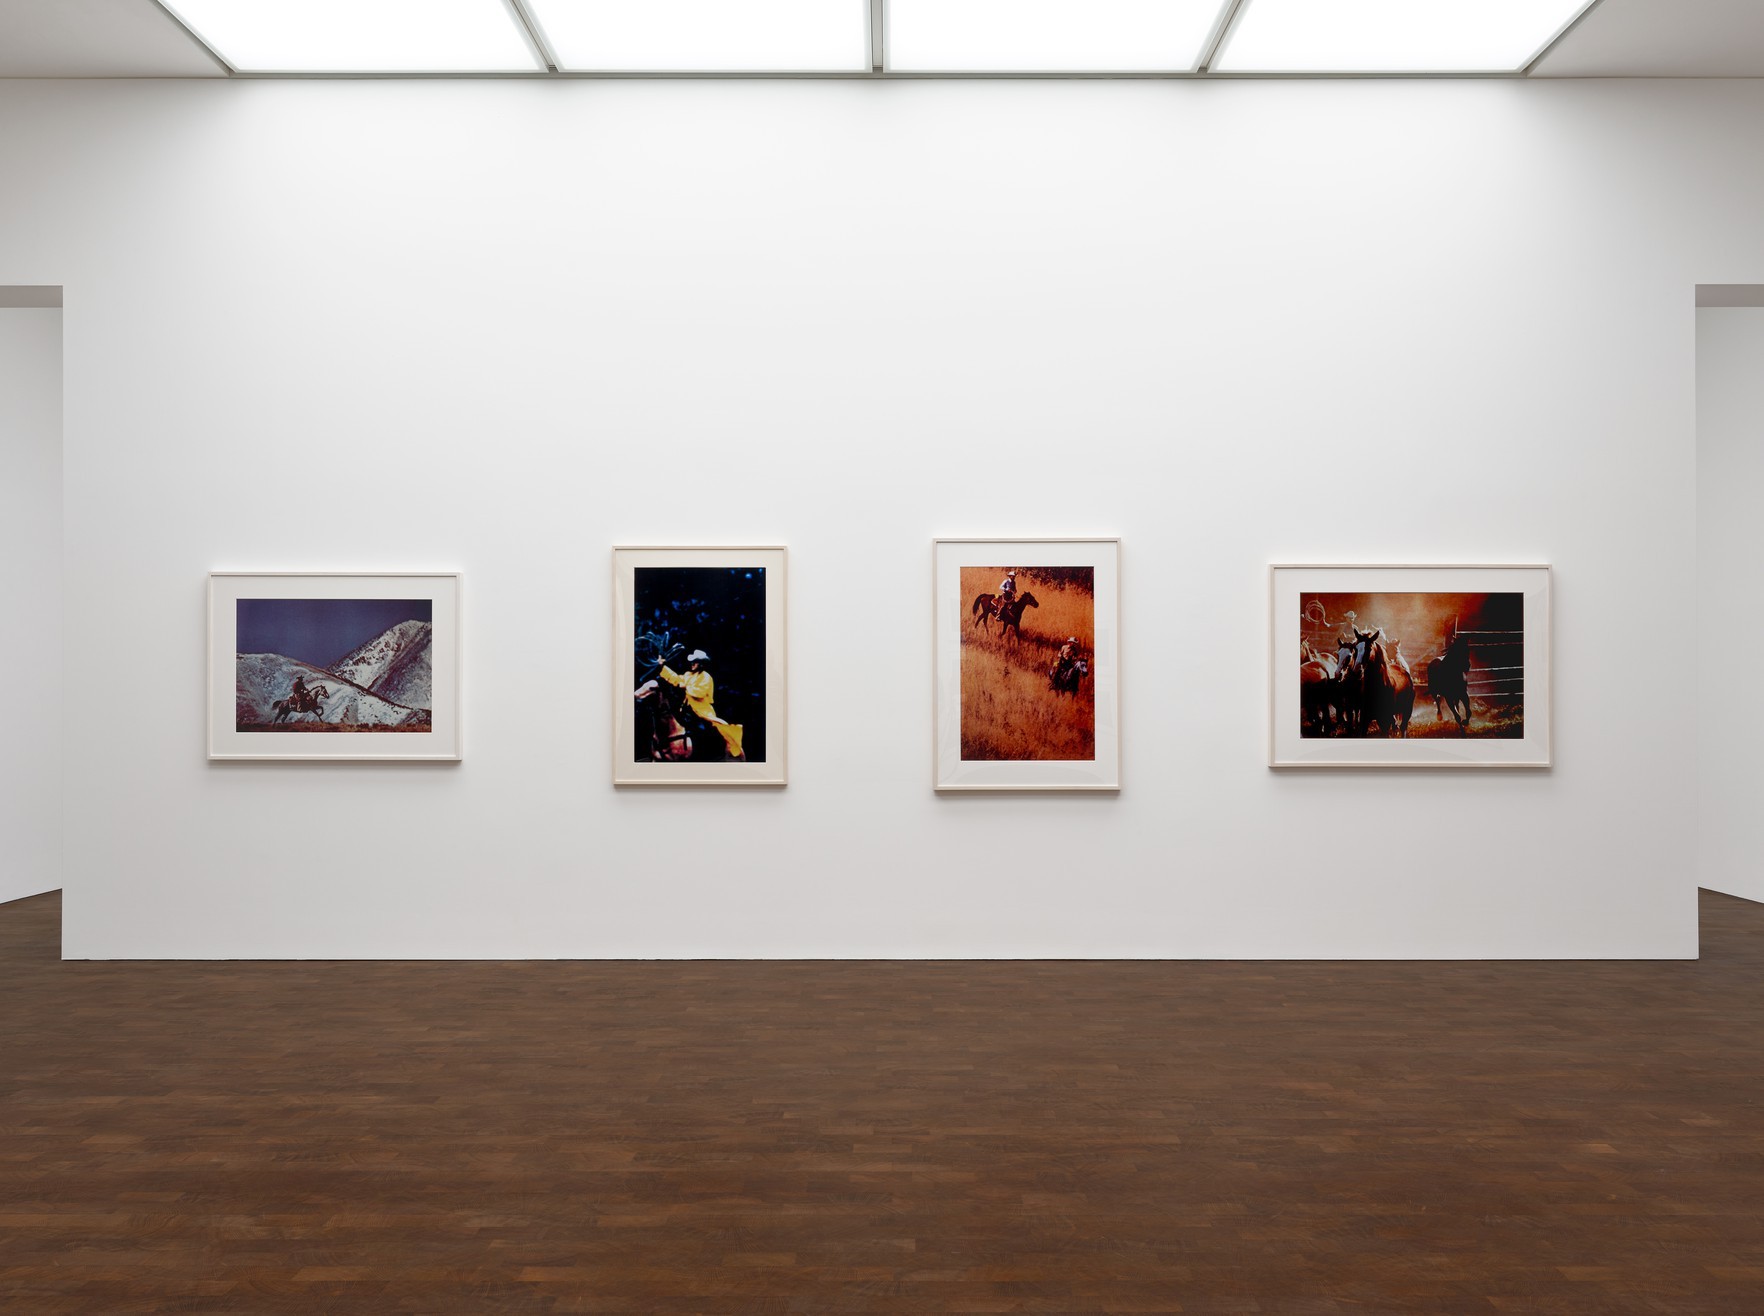 Installation image for Richard Prince: Early Photography, 1977–87, at Gagosian